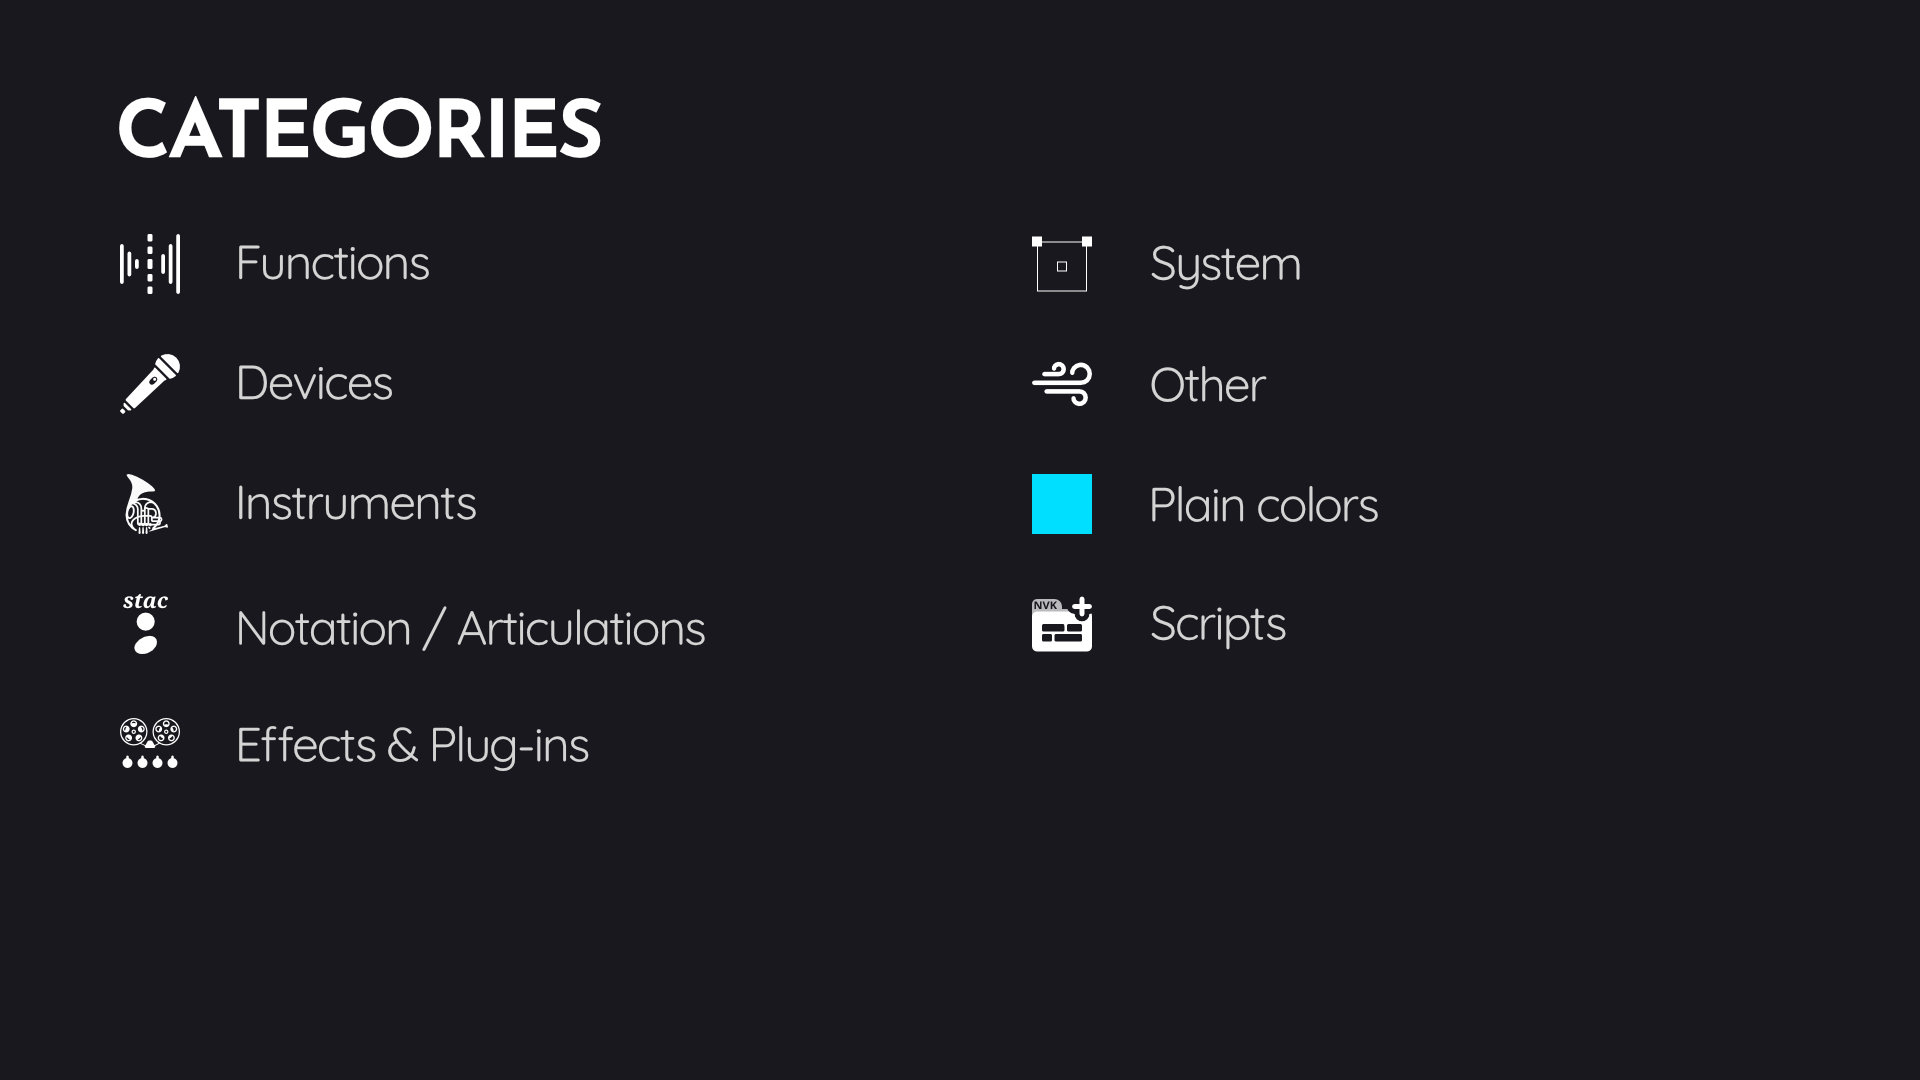 Icon categories. Functions, Devices, Instruments, Notation/Articualtions, Effects & Plug-ins, System, Other, Plain colors, Scripts.